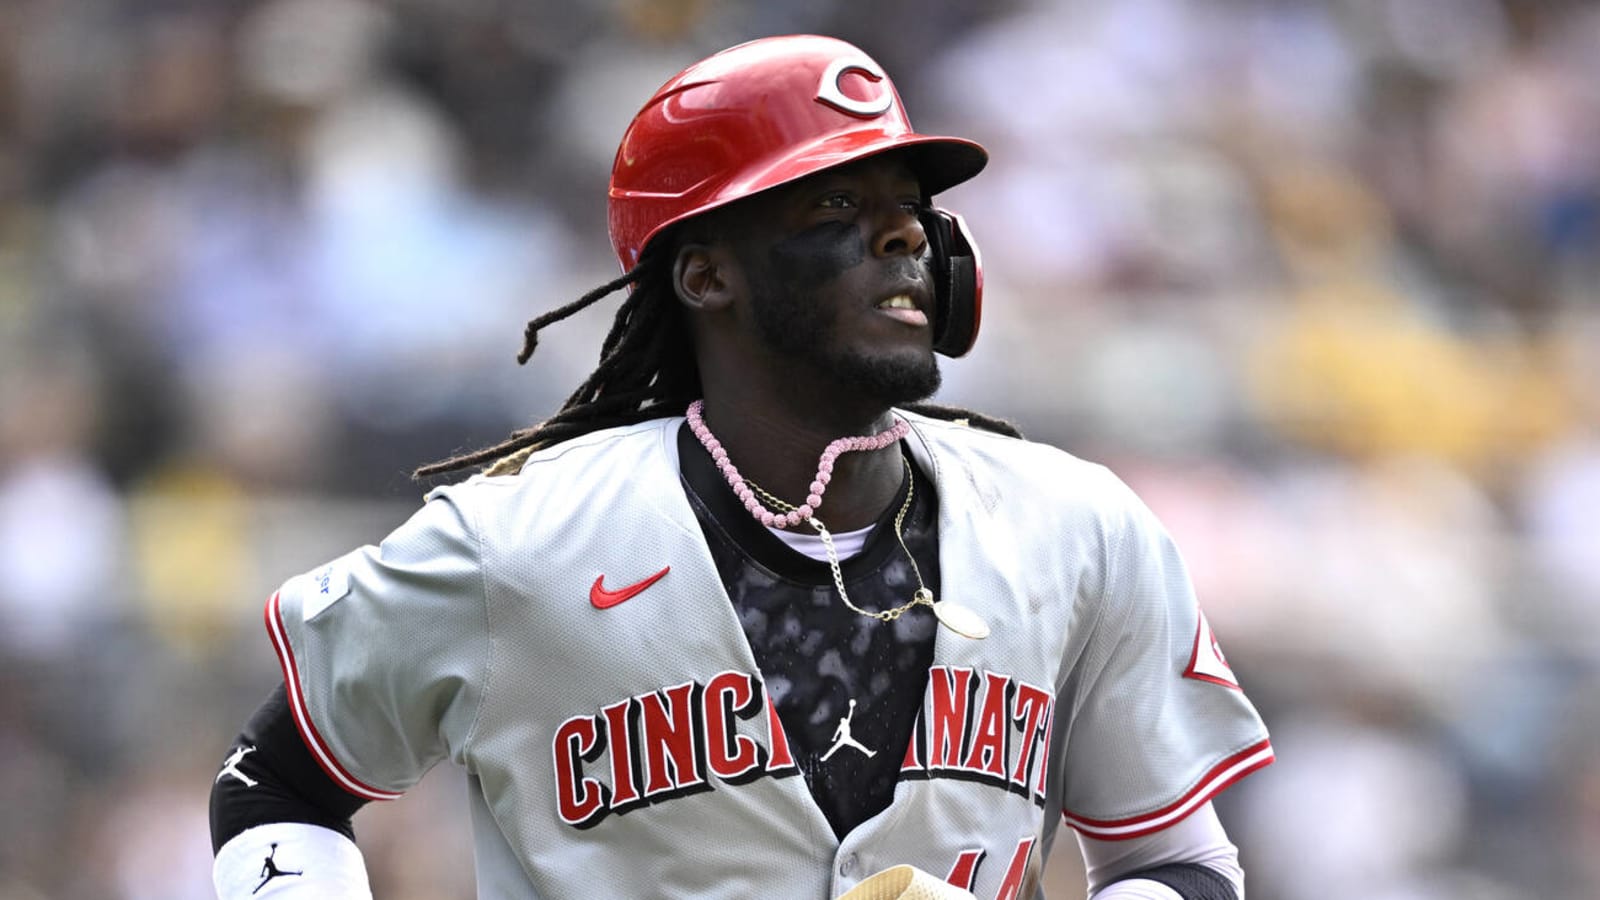 Reds star shortstop on pace for historic season